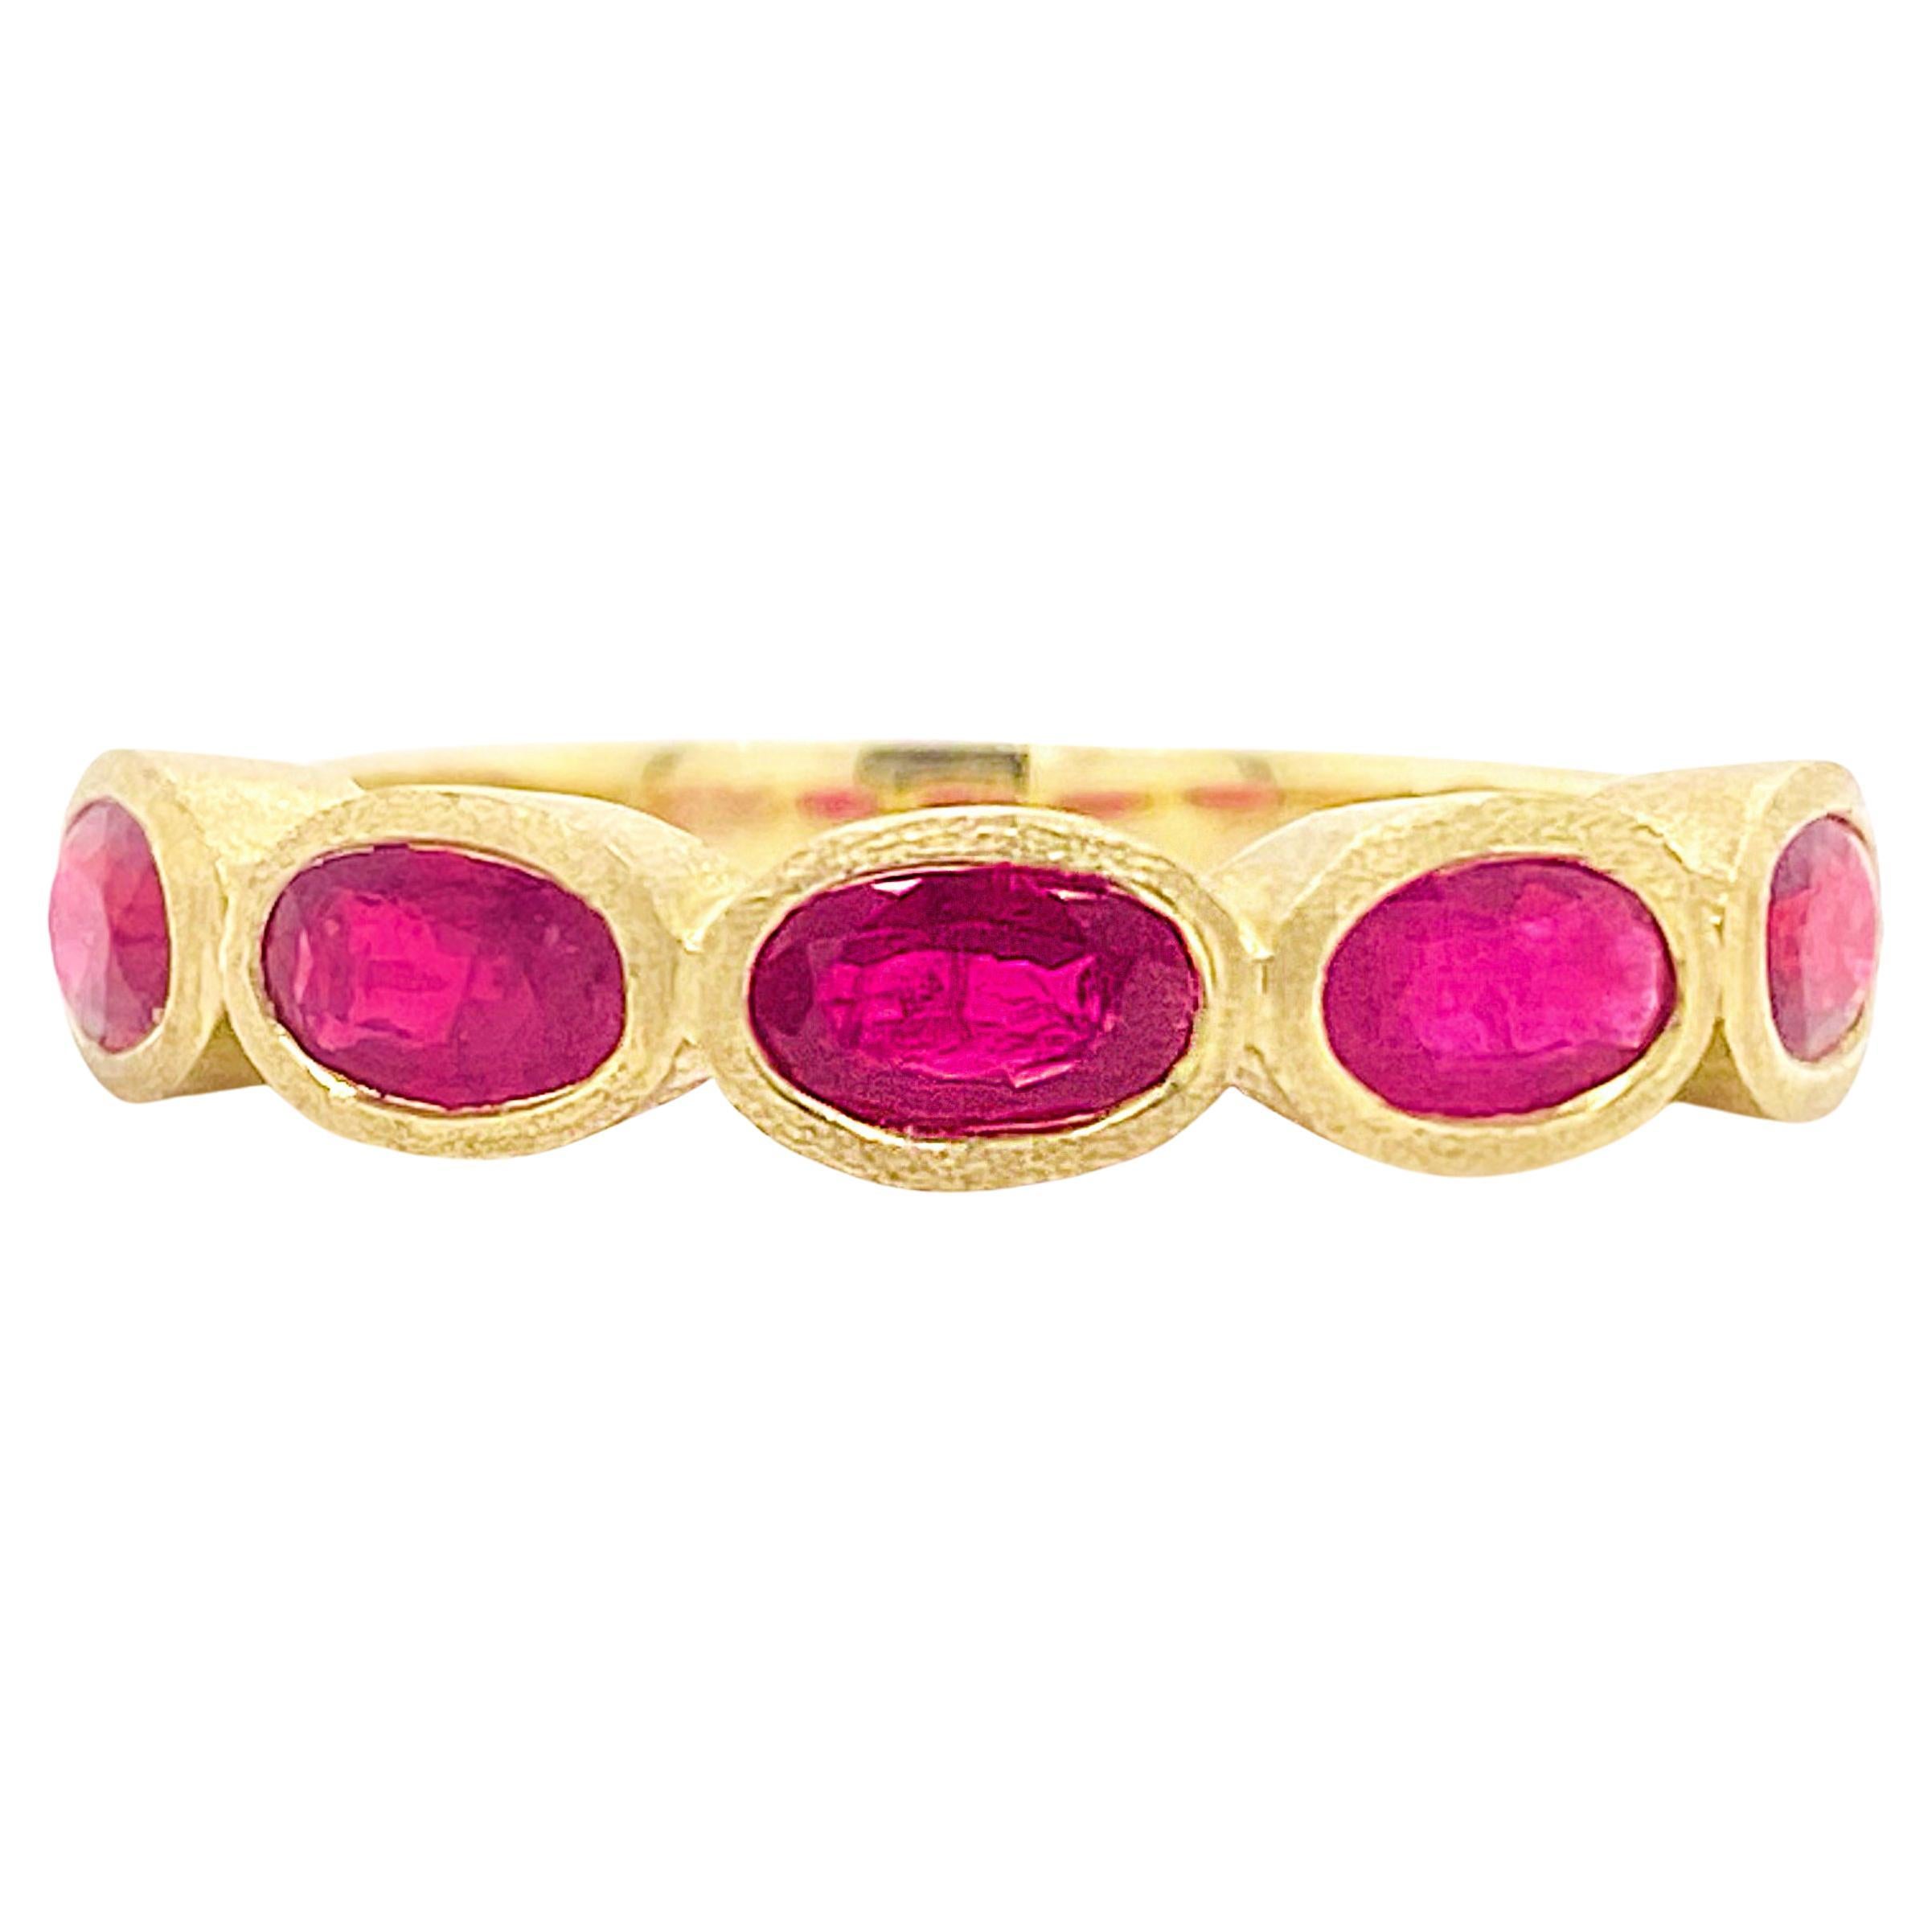 Ruby Band Ring, Yellow Gold Satin 1.52 Carat TW Gorgeous CUSTOM ORDER 4-5 WEEKS For Sale